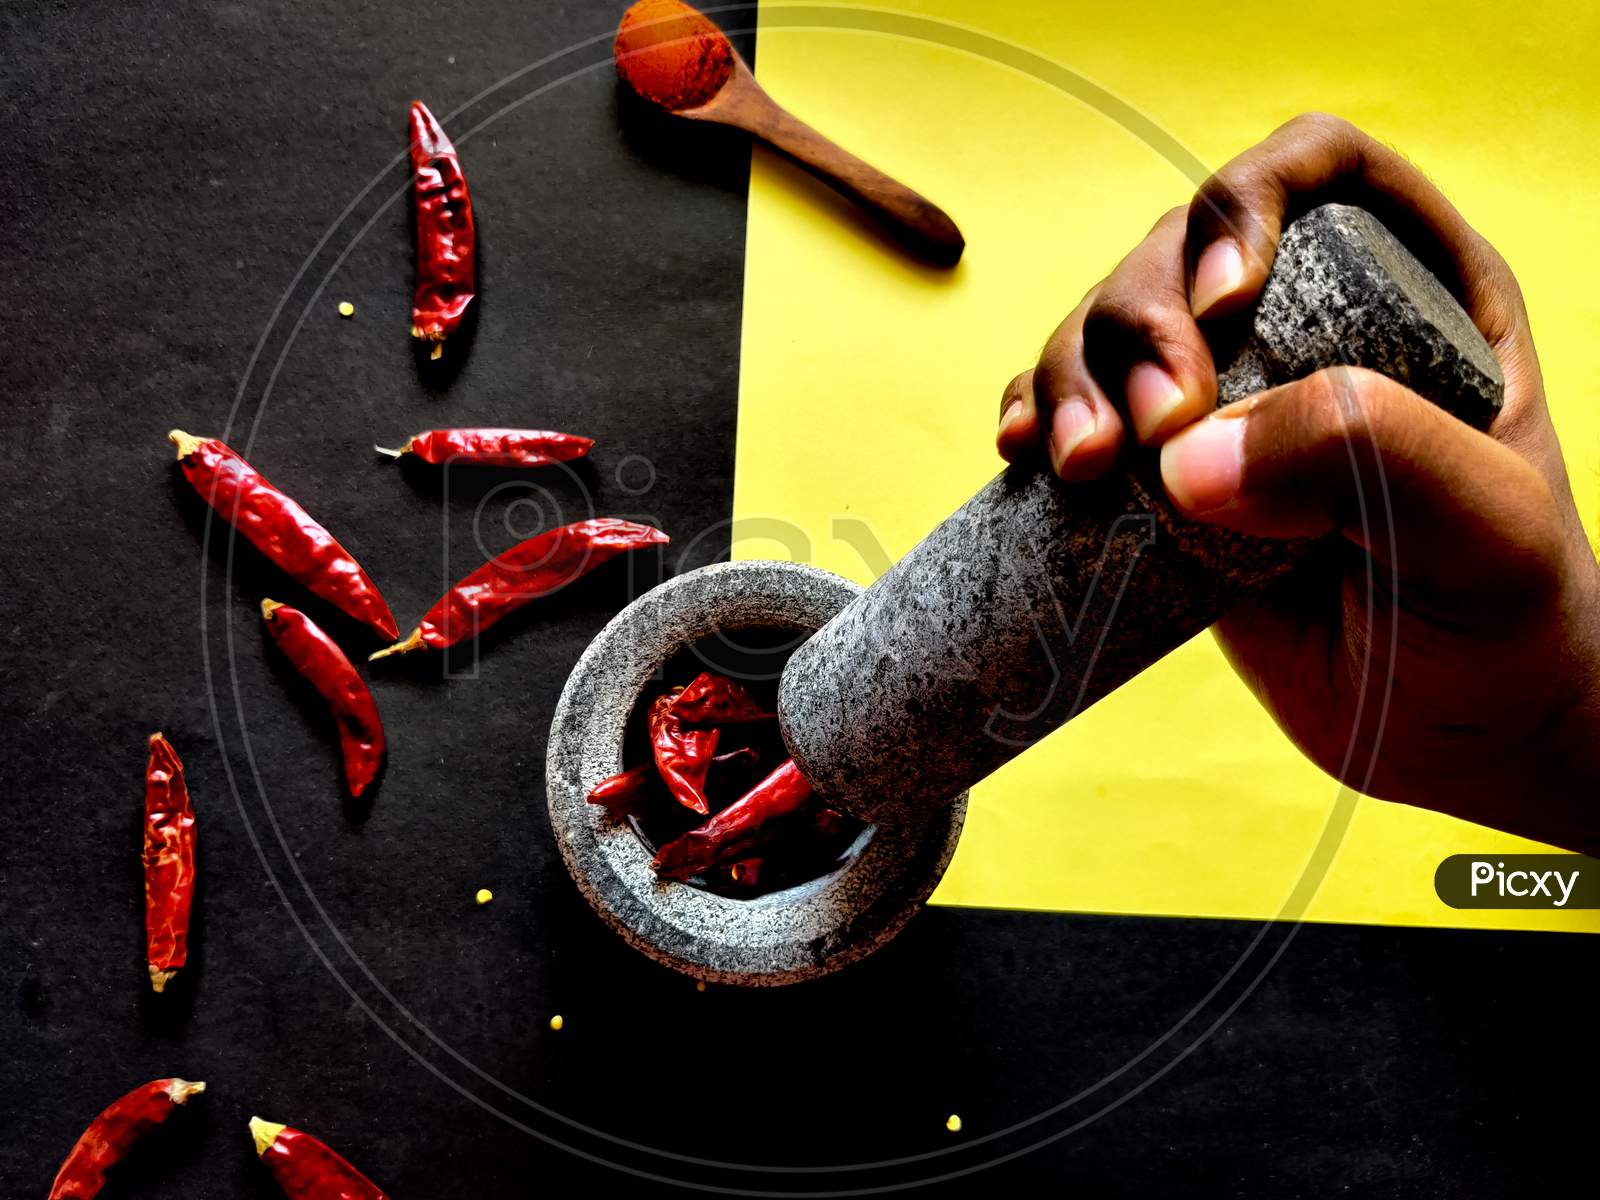 Human Hand Holding Mortar And Ready To Crush The Red Chillies In Pestle. Isolated On Yellow And Black Background.